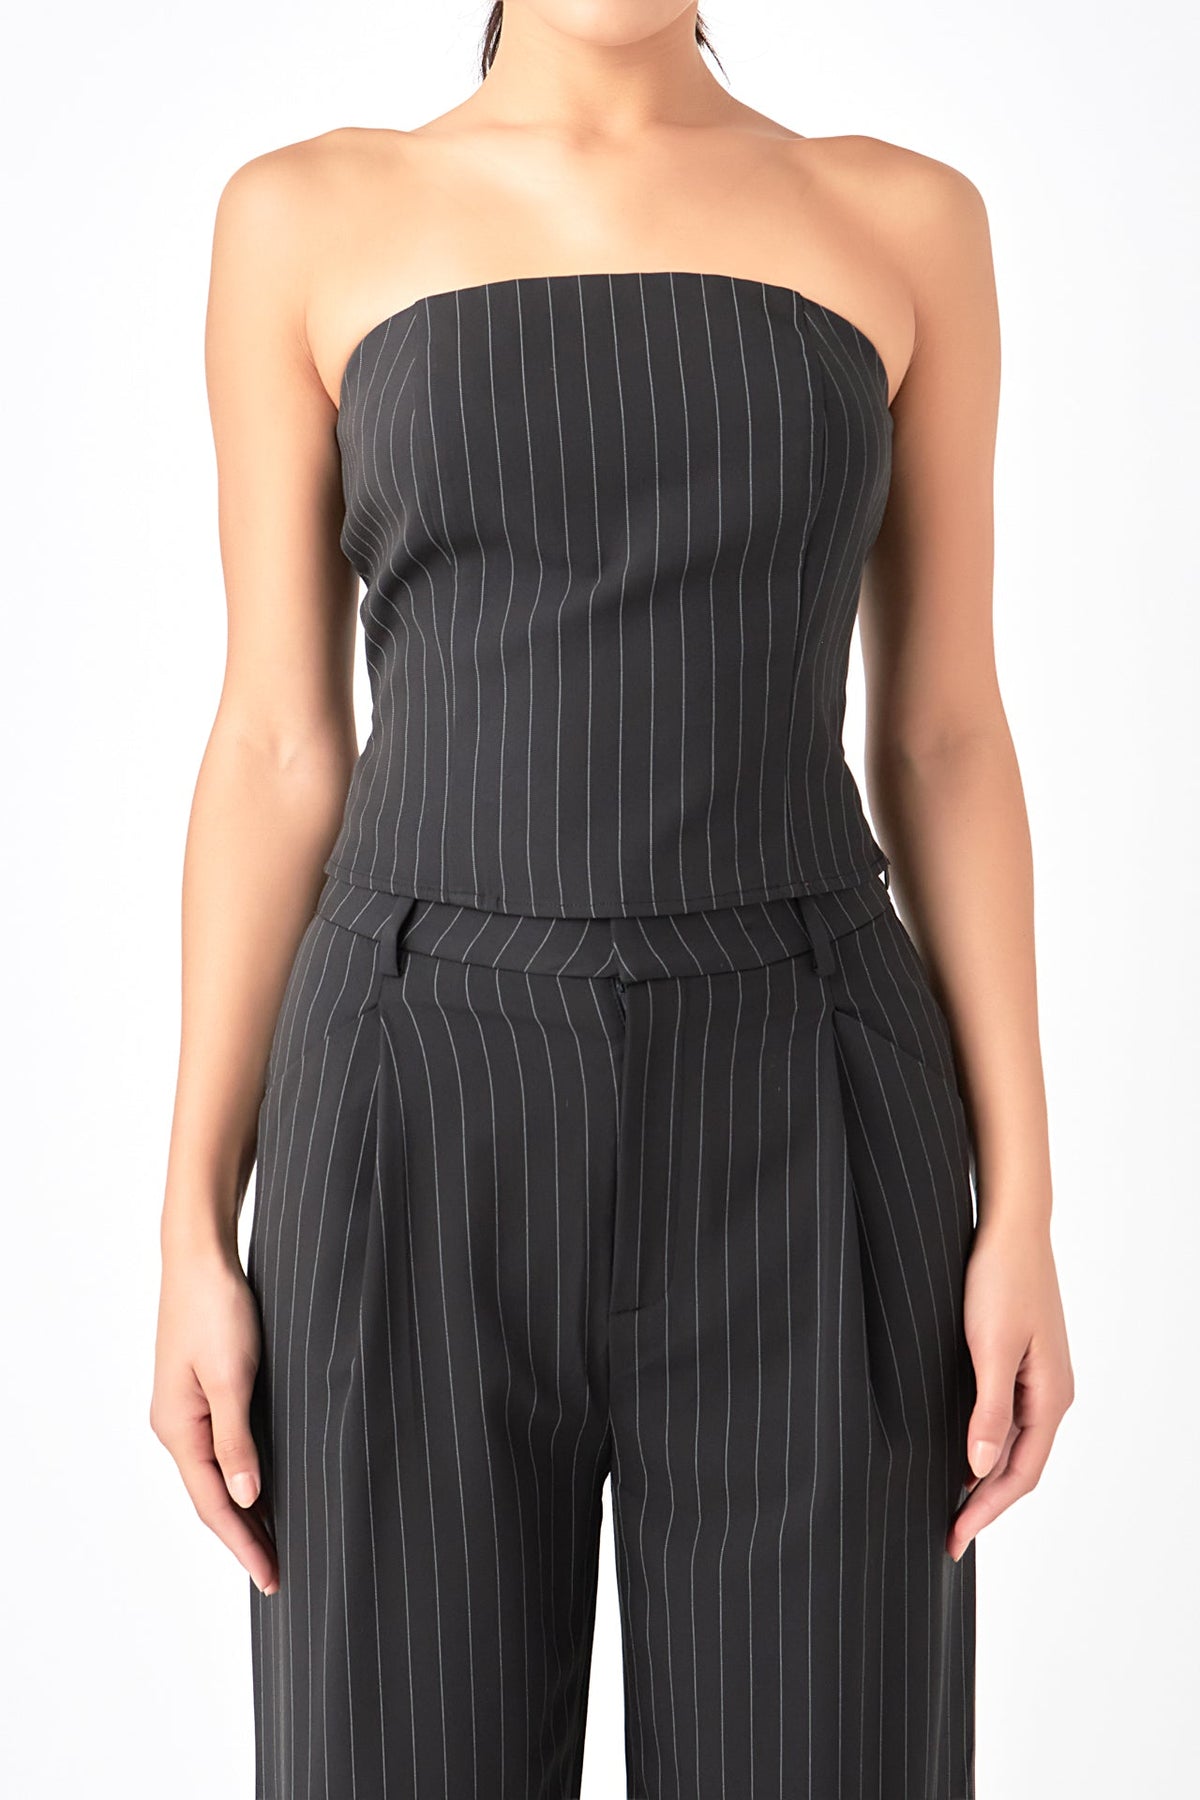 GREY LAB - Pinstriped Tube Top - TOPS available at Objectrare